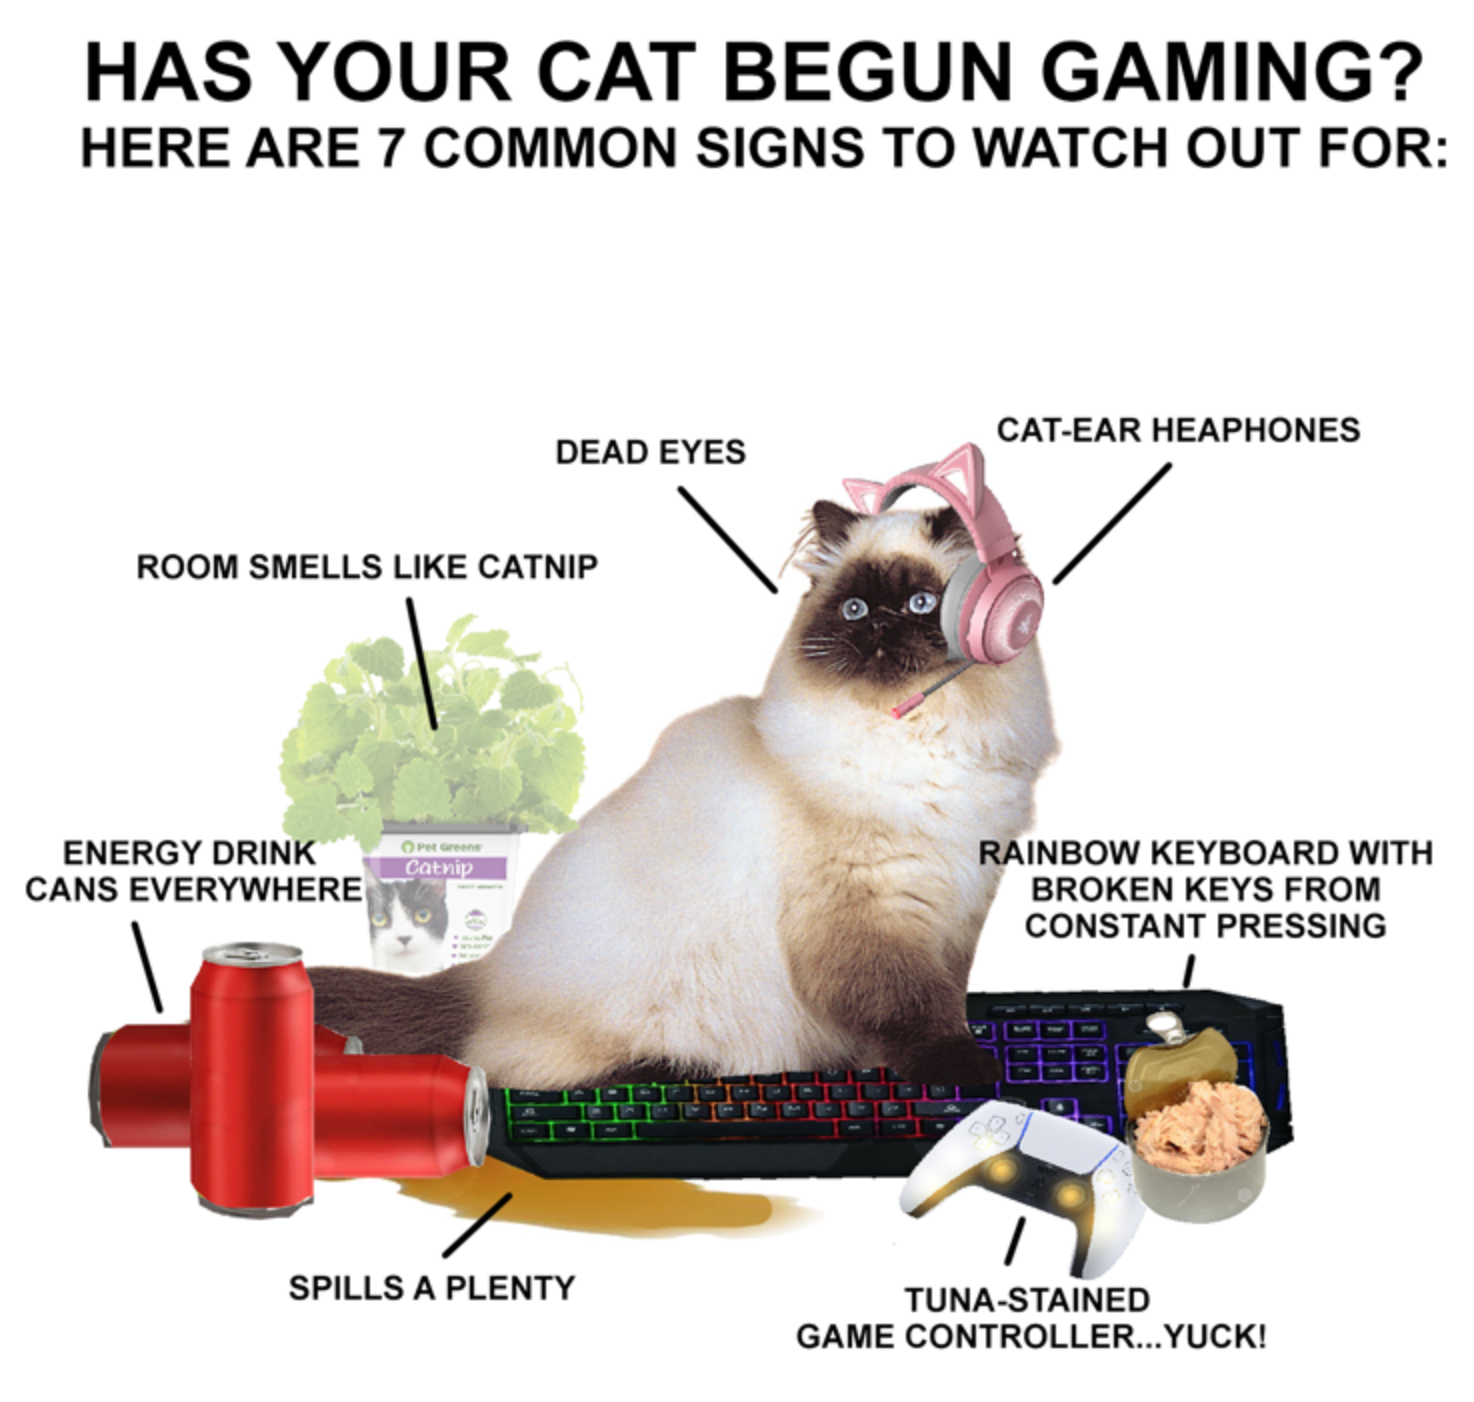 funny gaming memes - cat - Has Your Cat Begun Gaming? Here Are 7 Common Signs To Watch Out For Dead Eyes CatEar Heaphones Room Smells Catnip Energy Drink Cans Everywhere Rainbow Keyboard With Broken Keys From Constant Pressing Spills A Plenty TunaStained 